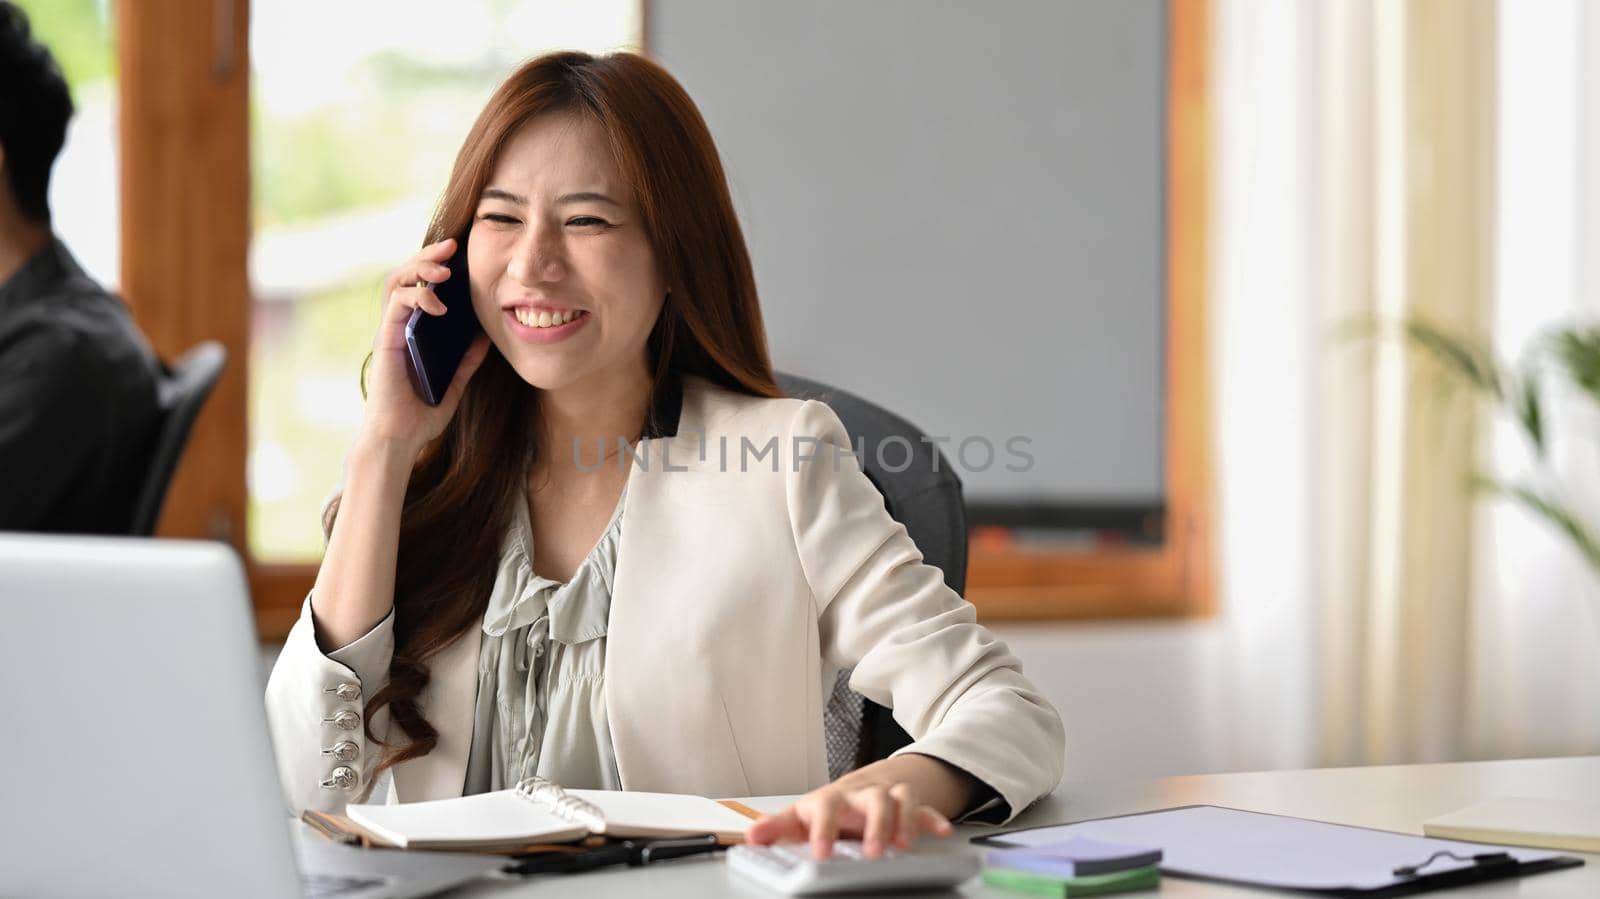 Successful millennial businesswoman sitting at her workplace and negotiating with client on mobile phone.